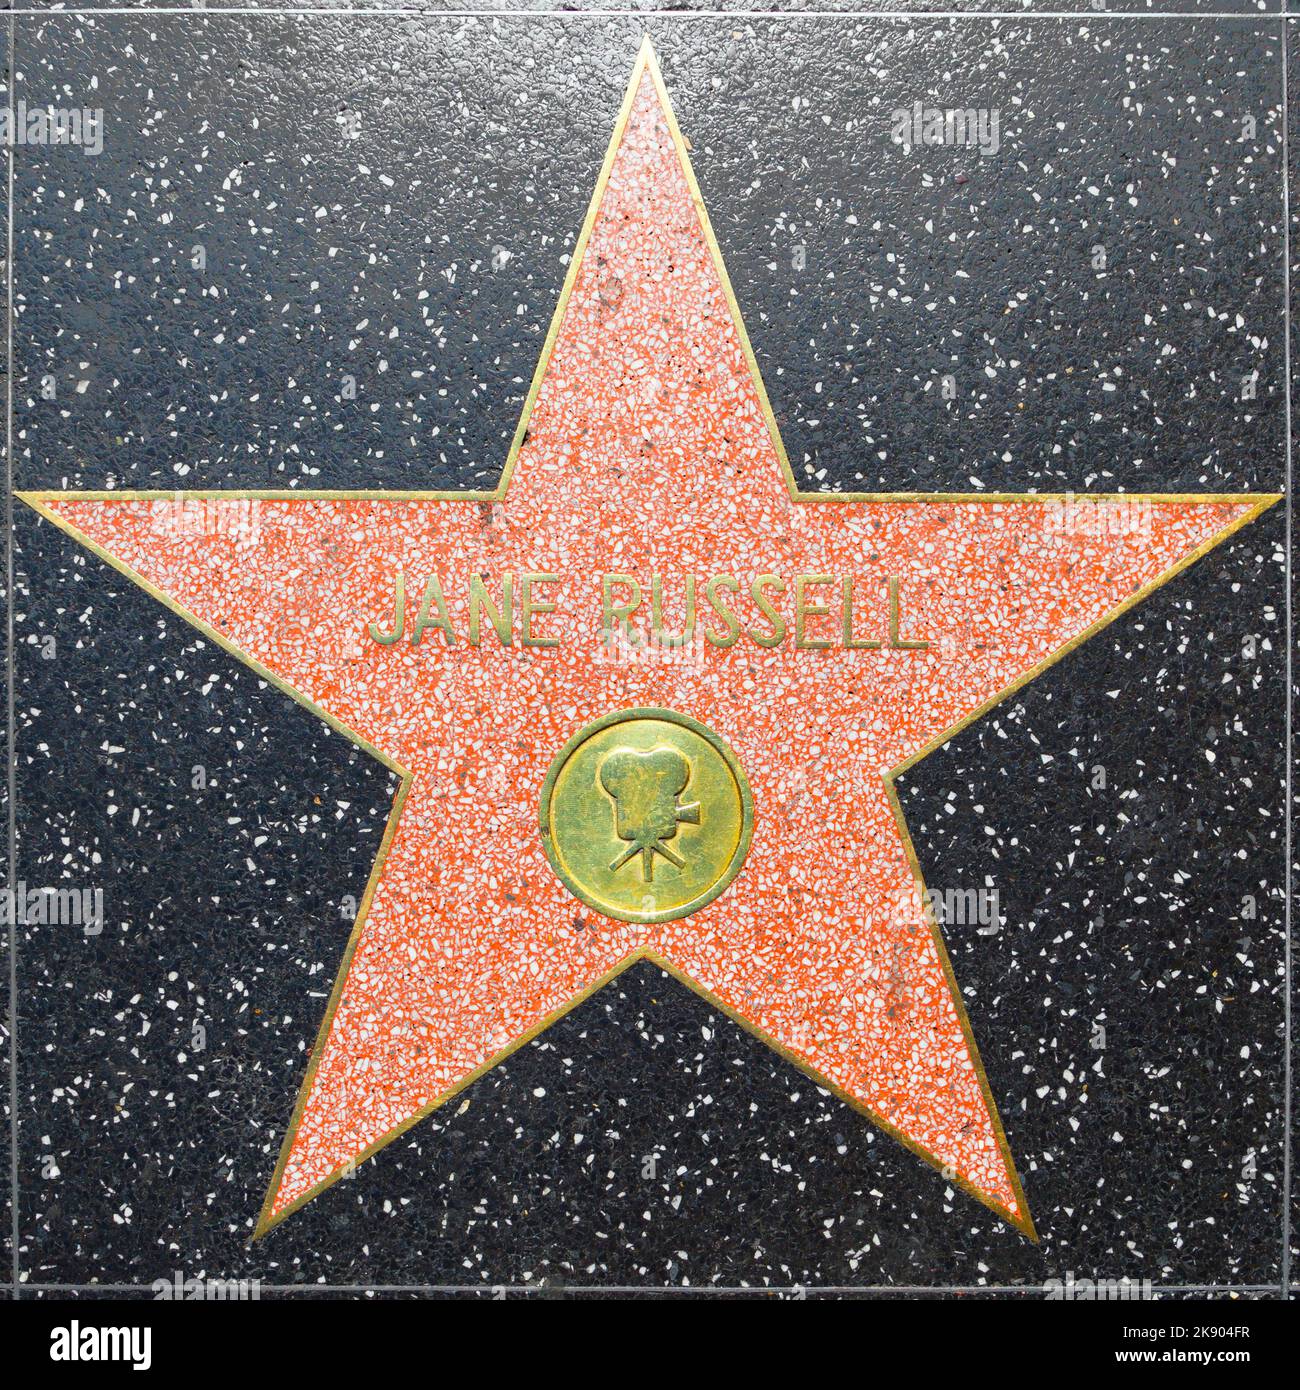 LOS ANGELES, USA - JUNE 26, 2012:Jane Russells star on Hollywood Walk of Fame   in Hollywood, California. This star is located on Hollywood Blvd. and Stock Photo